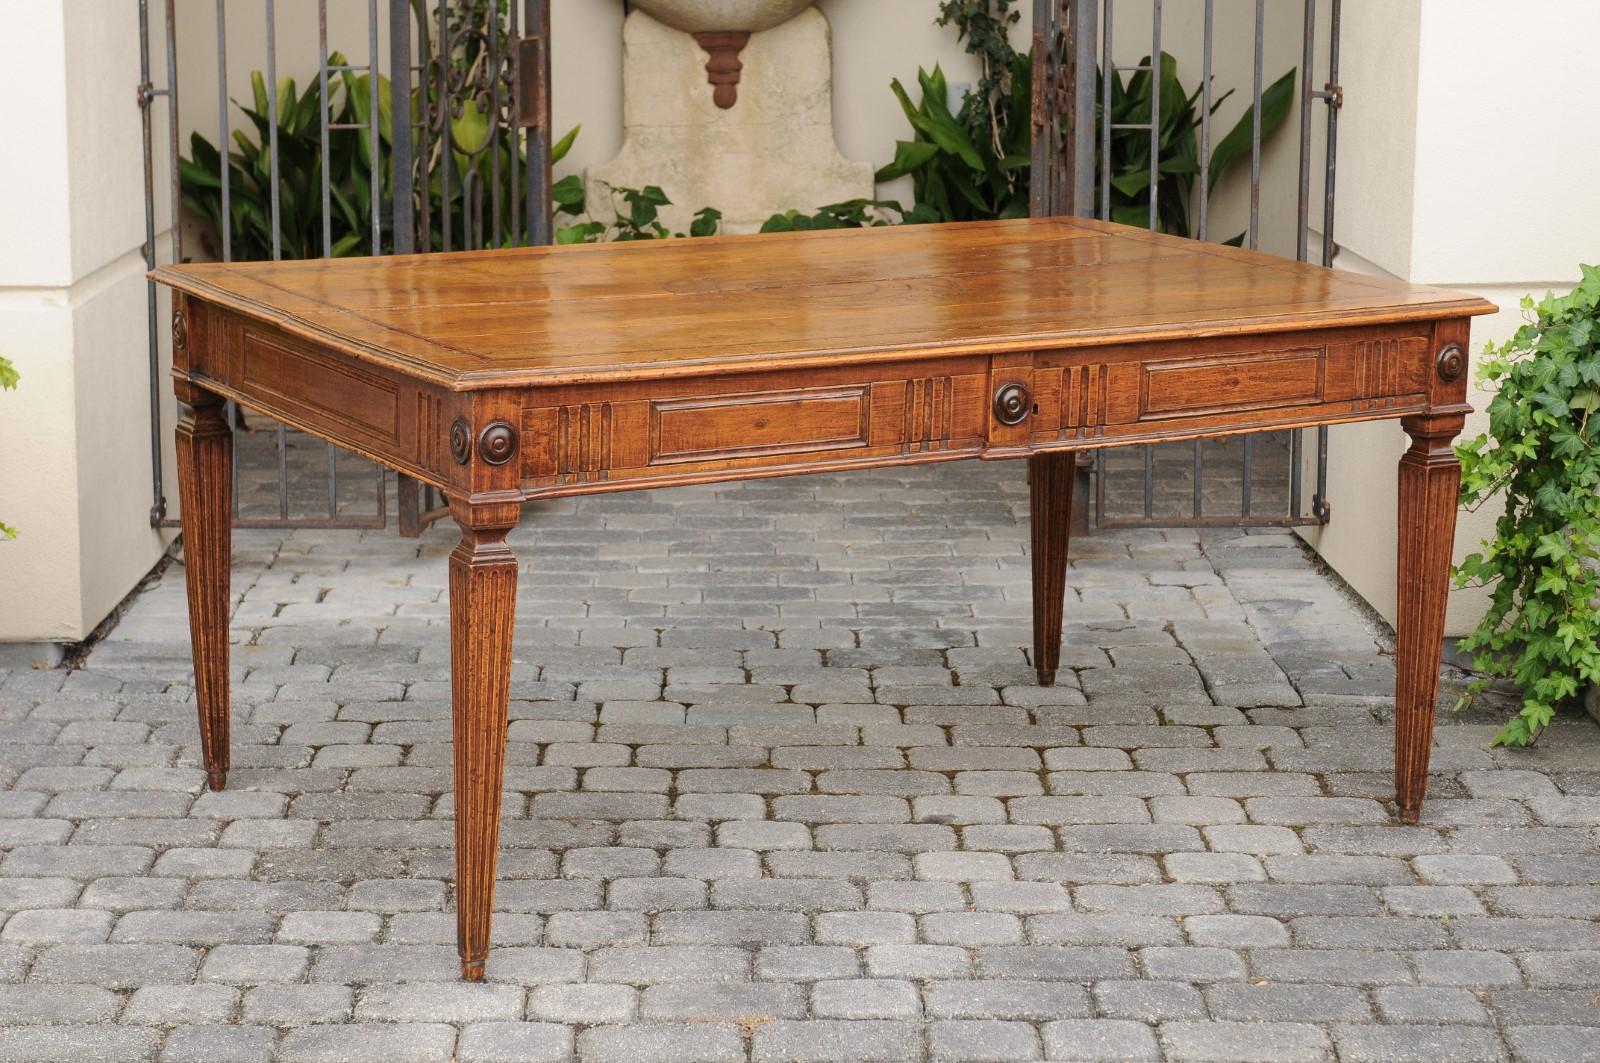 An Italian walnut desk from the mid-19th century with inlaid top, fluted accents and tapered legs. Born in Italy during the 1850s, this walnut writing table features a rectangular top with floral inlay, sitting above an exquisite apron adorned with